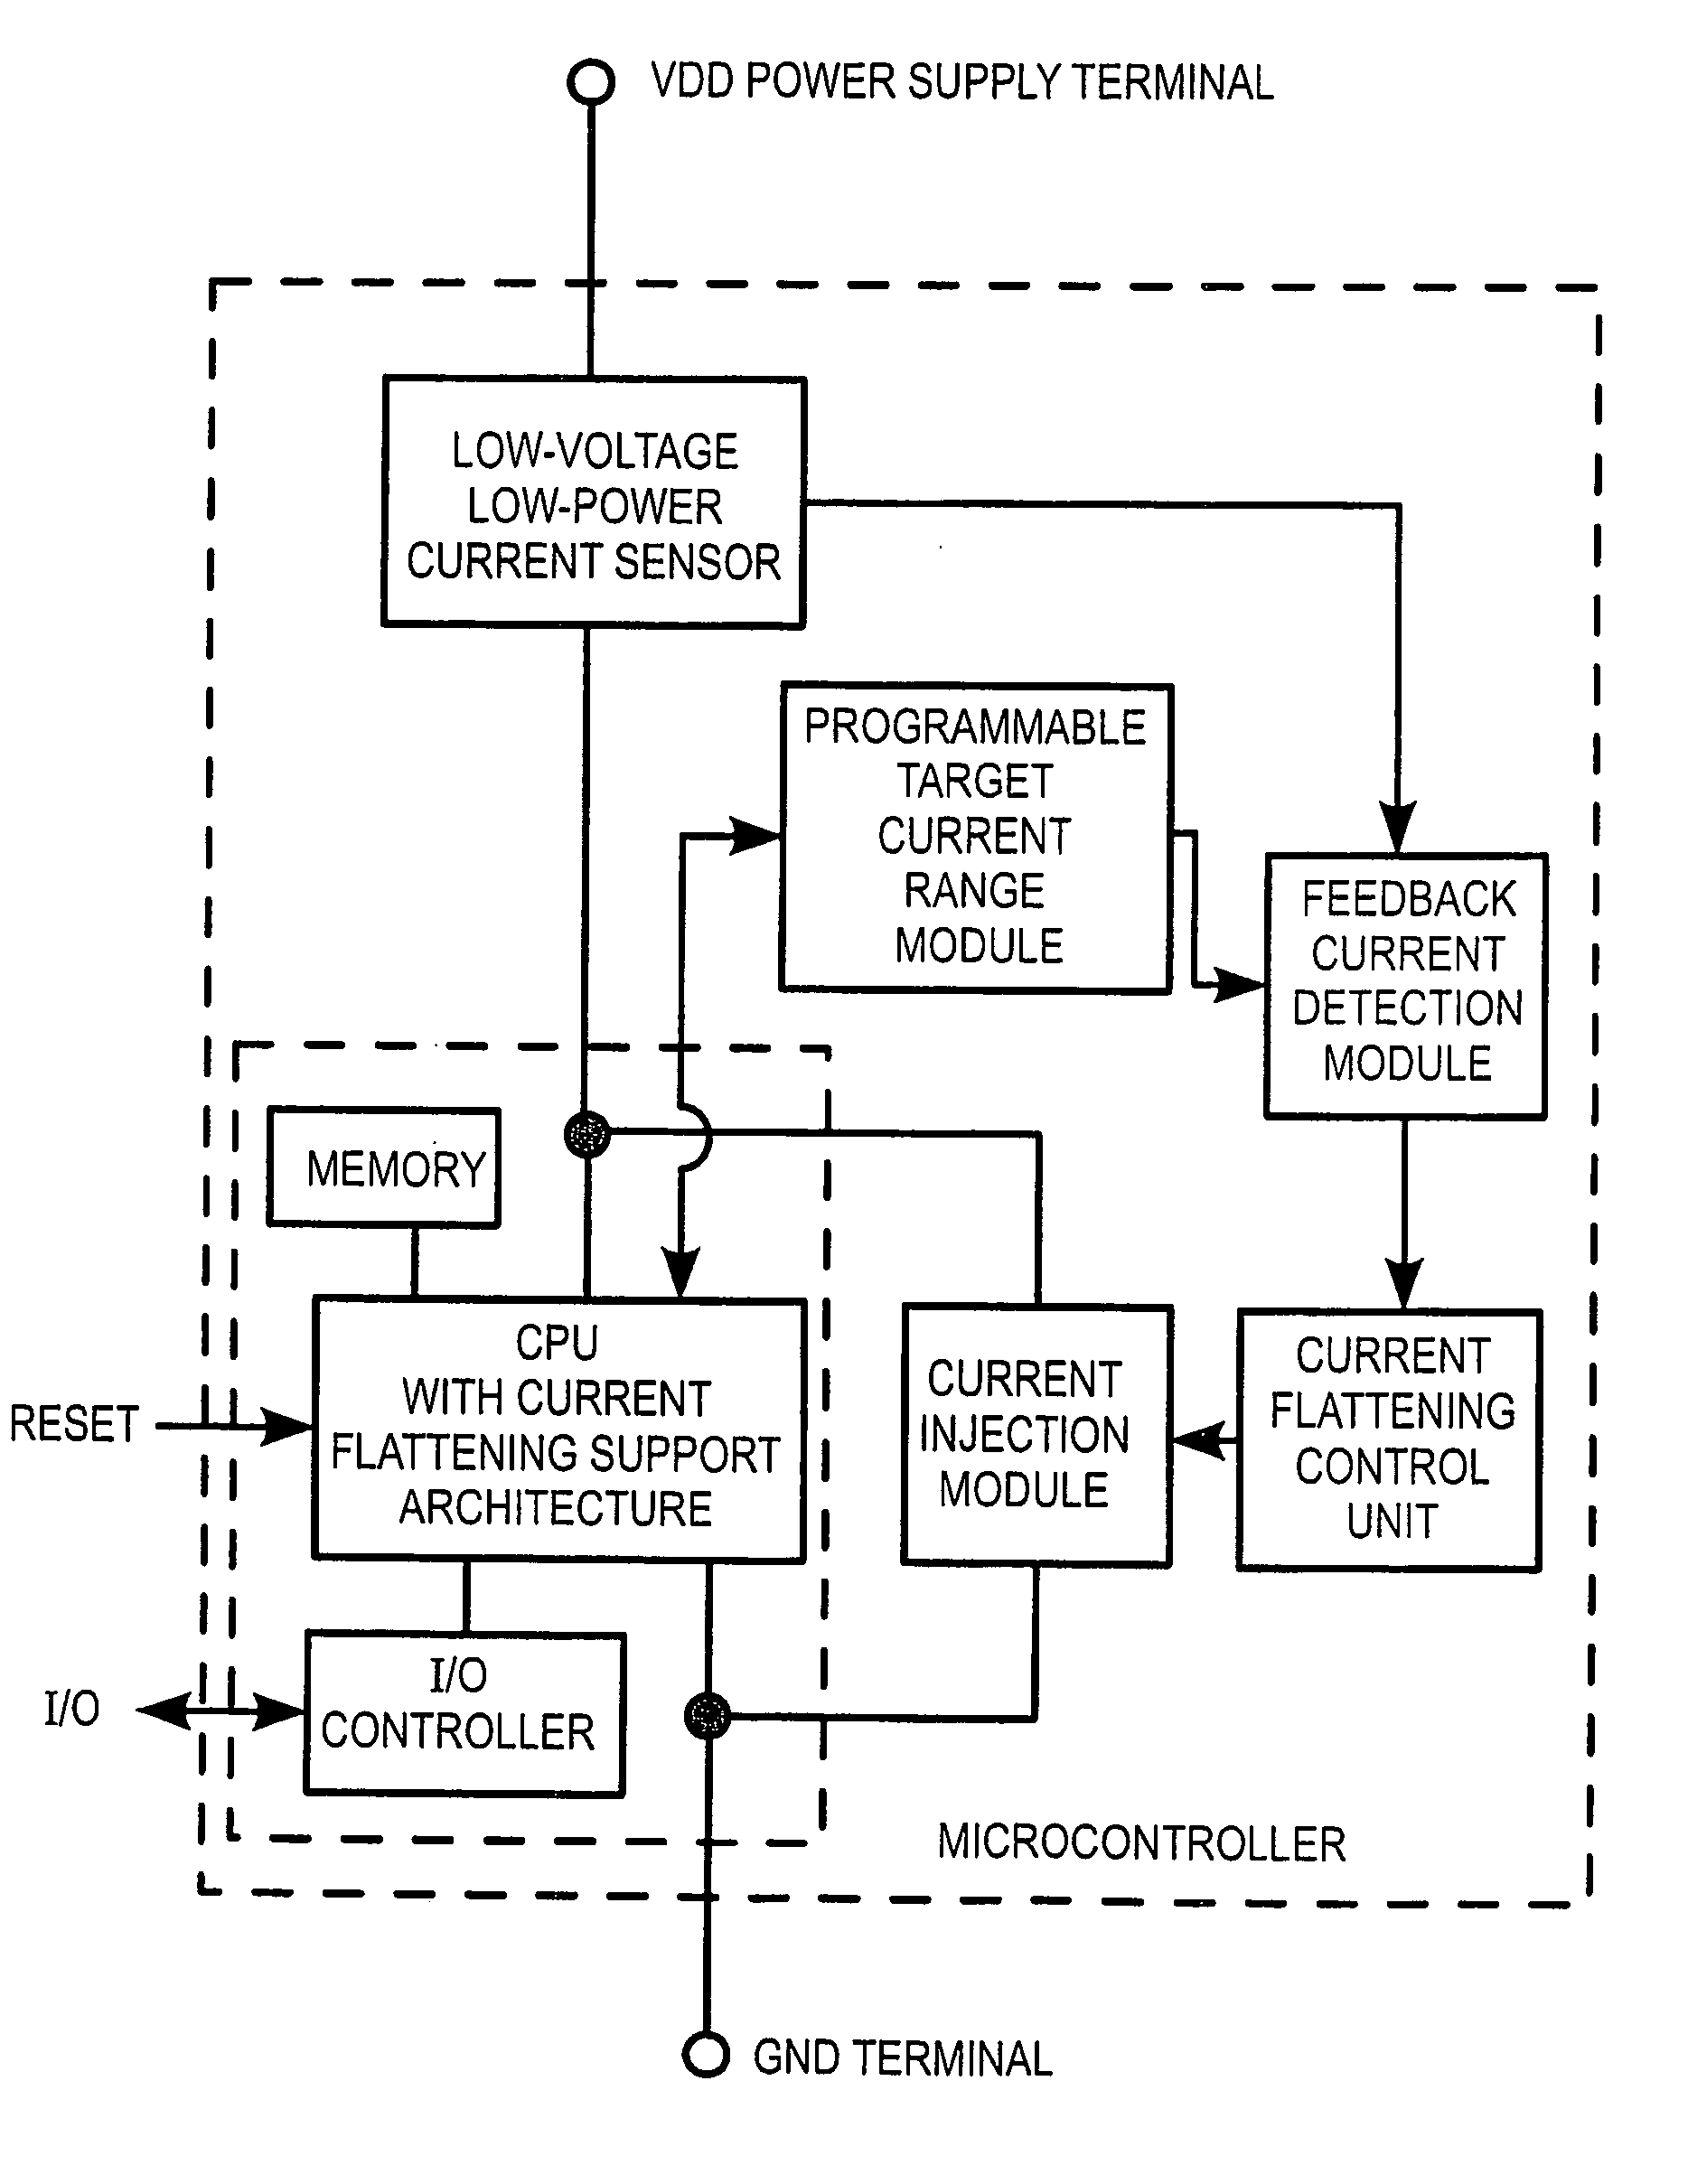 Current flattening and current sensing methods and devices